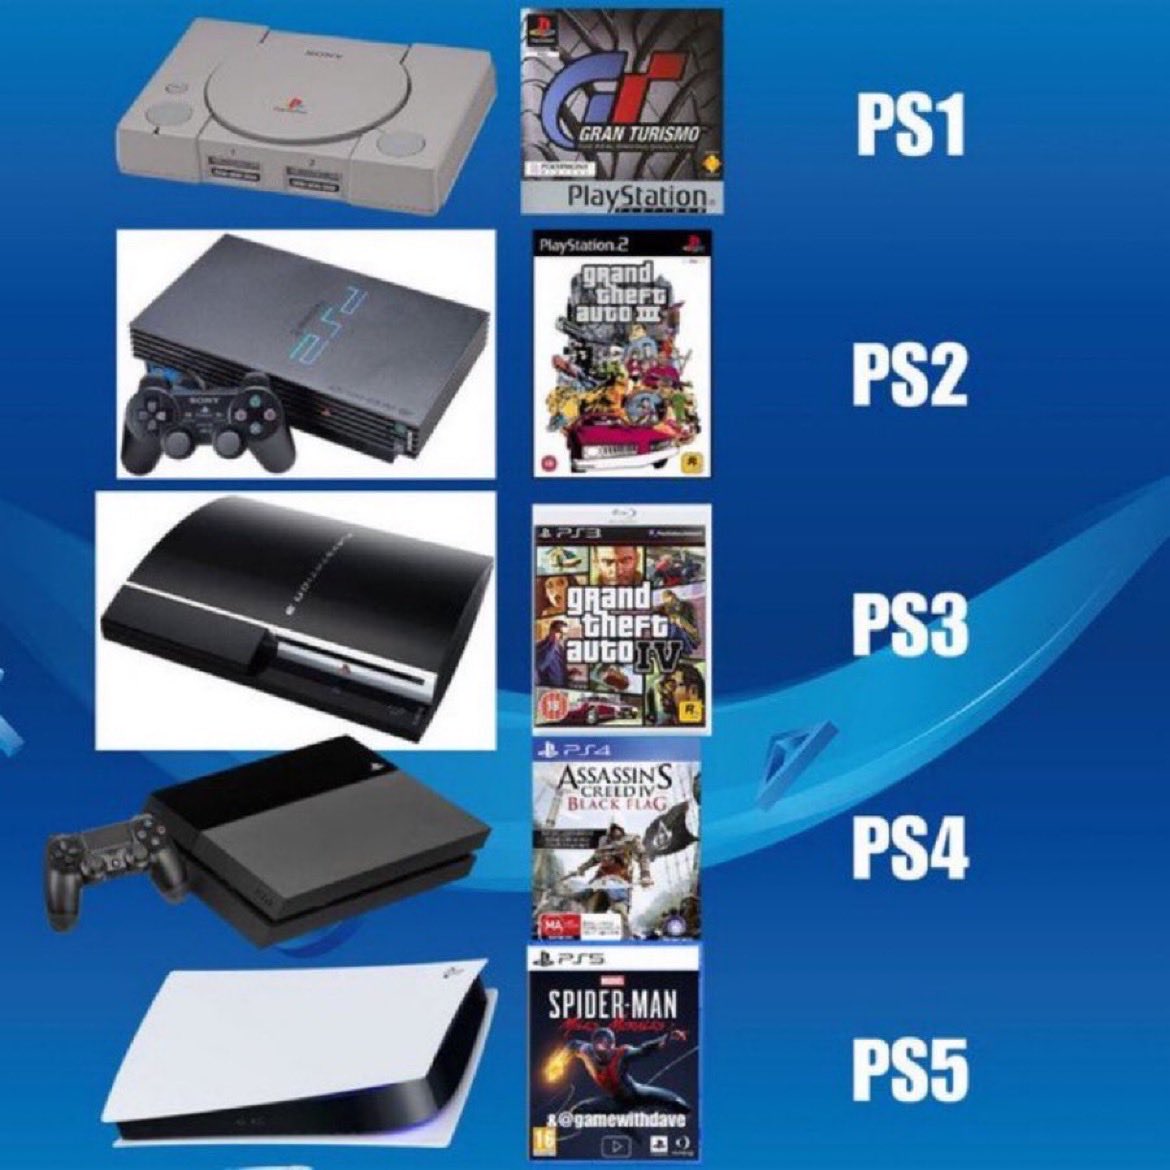 First game on each Playstation?